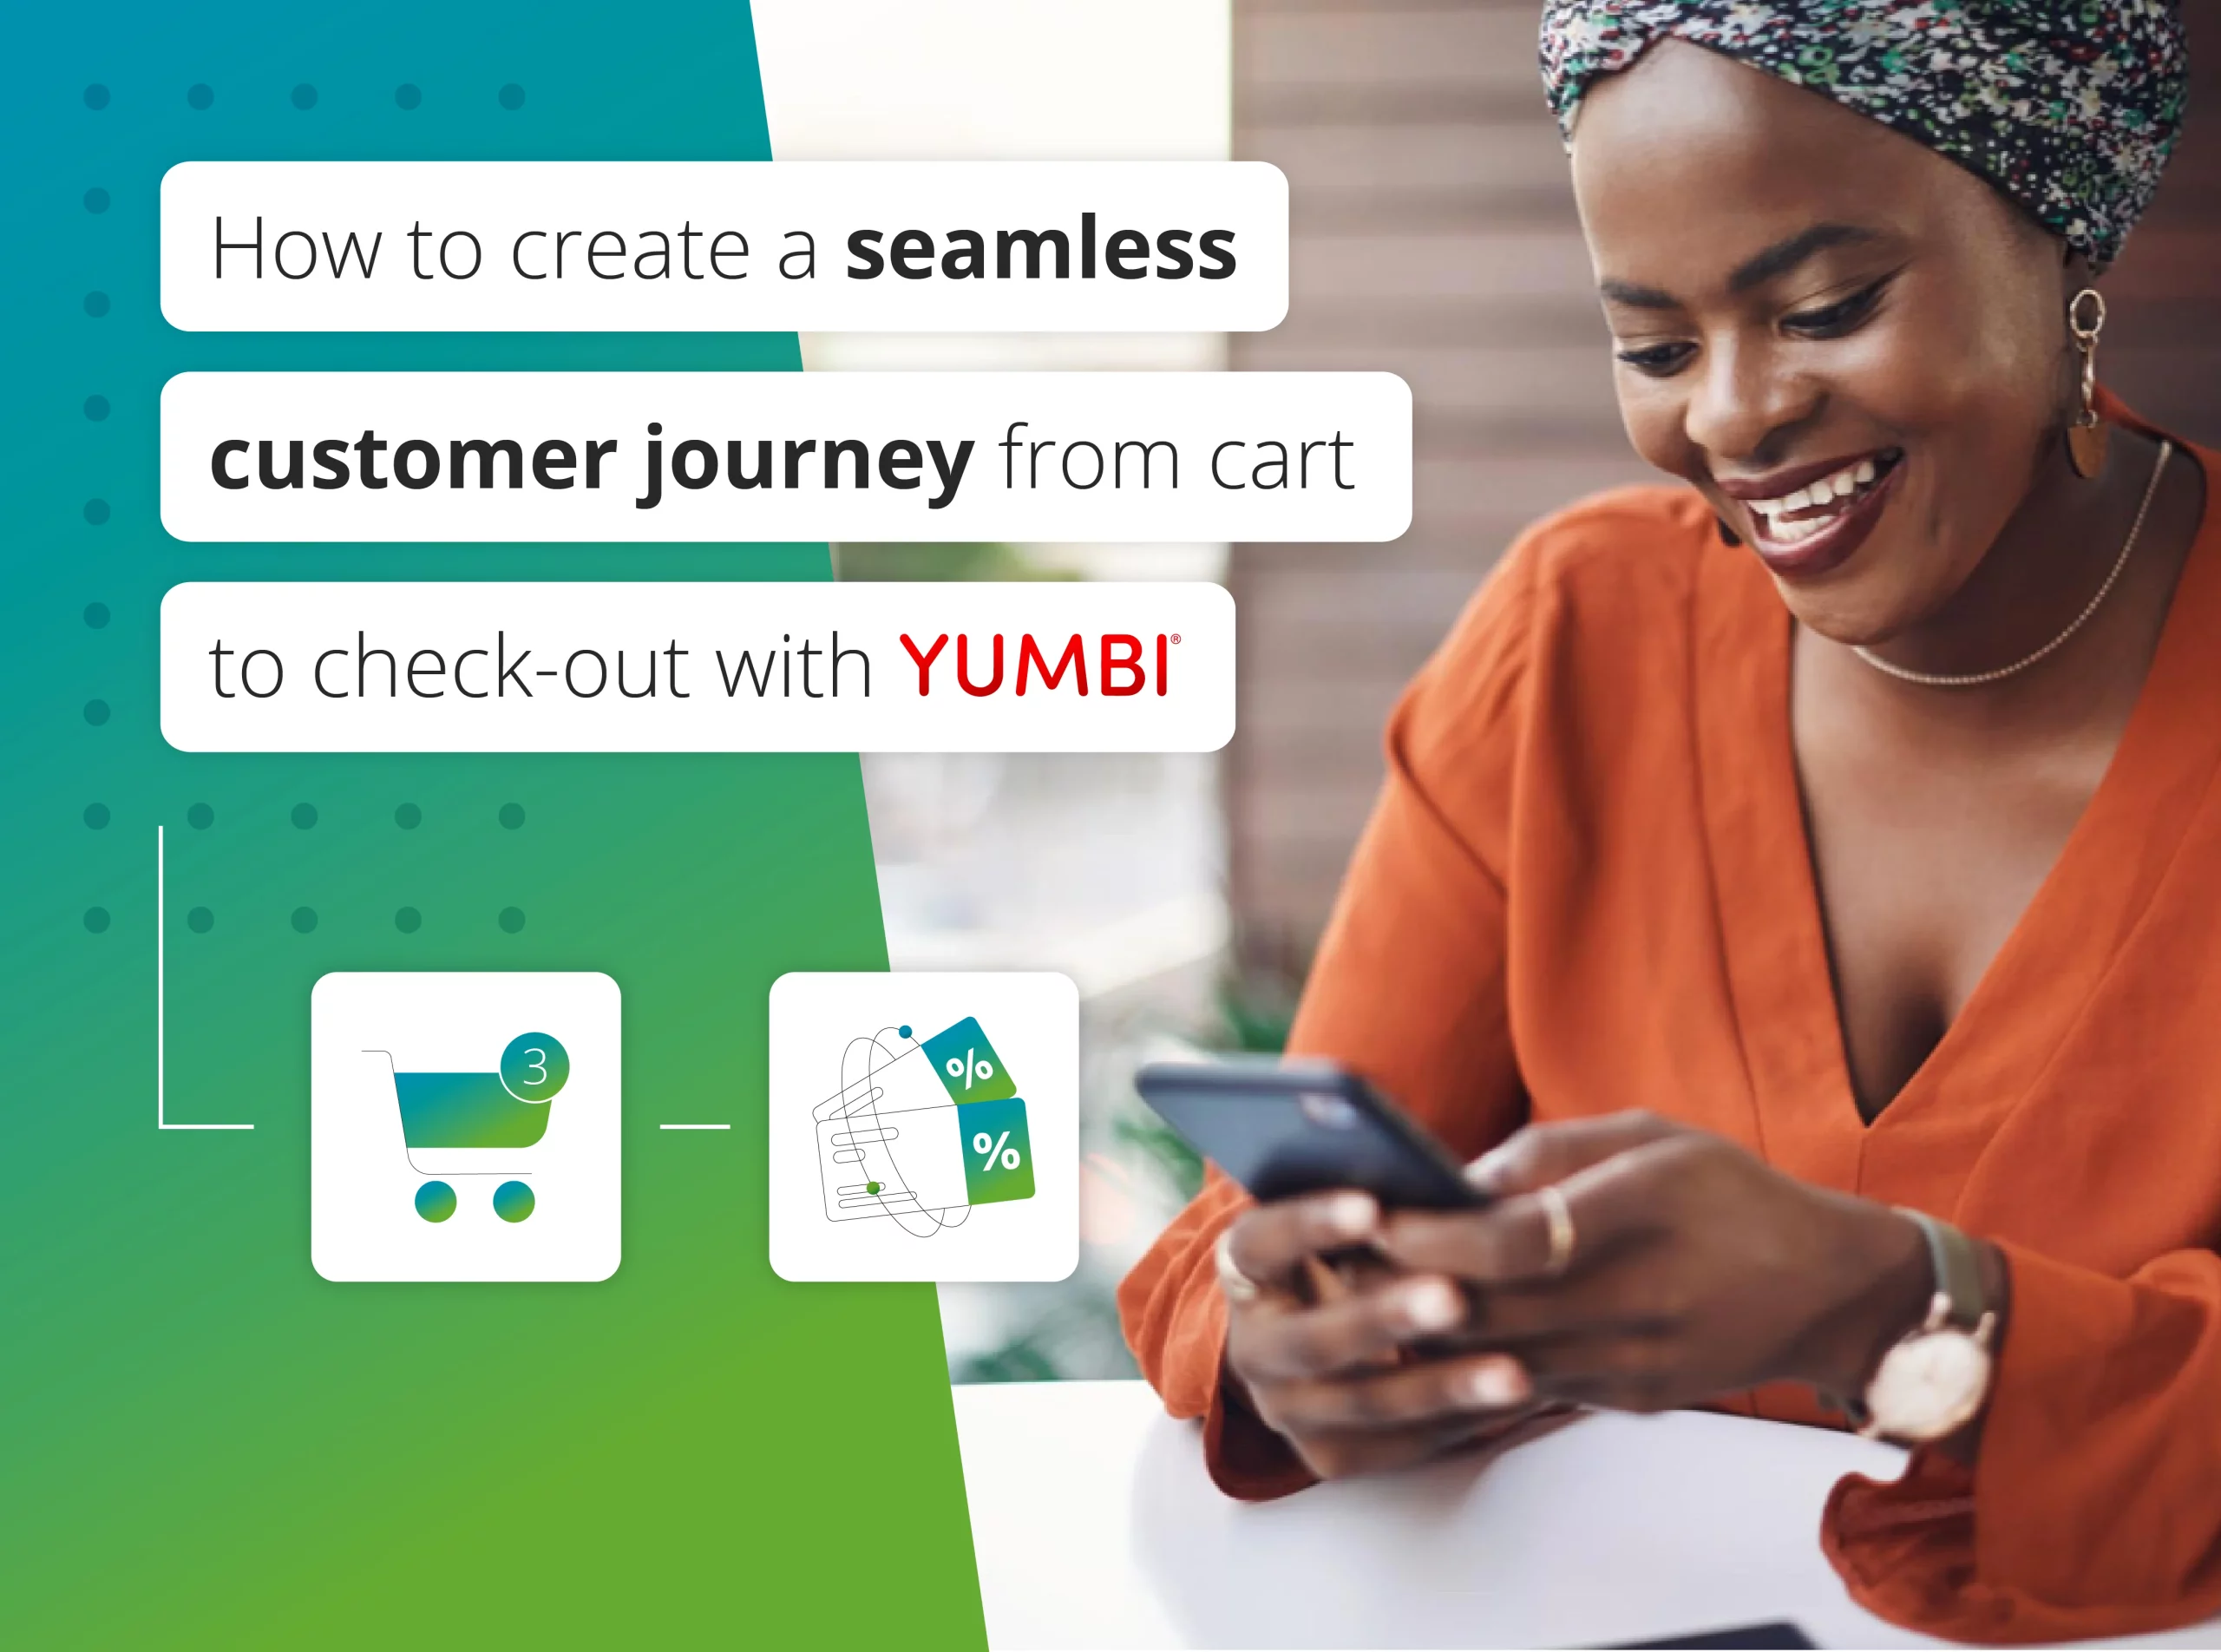 How to create a seamless customer journey from cart to check-out with YUMBI